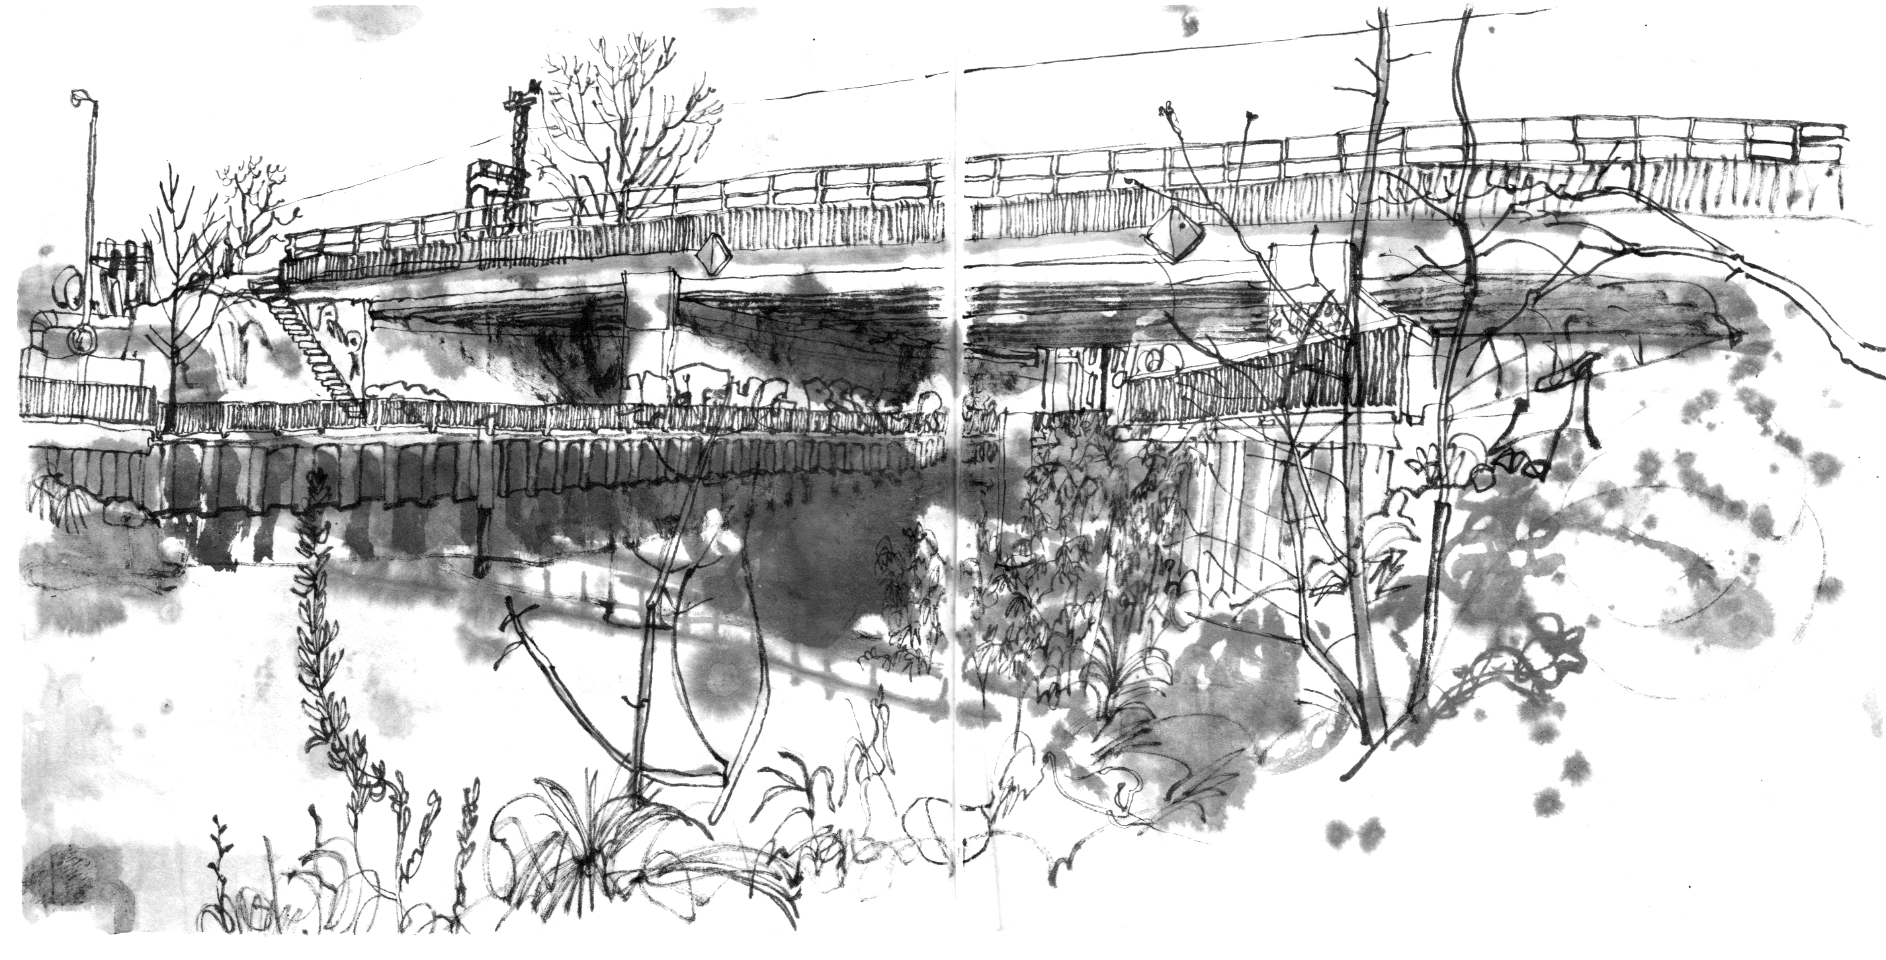 Ink drawing of a railway bridge, crossing a canal.